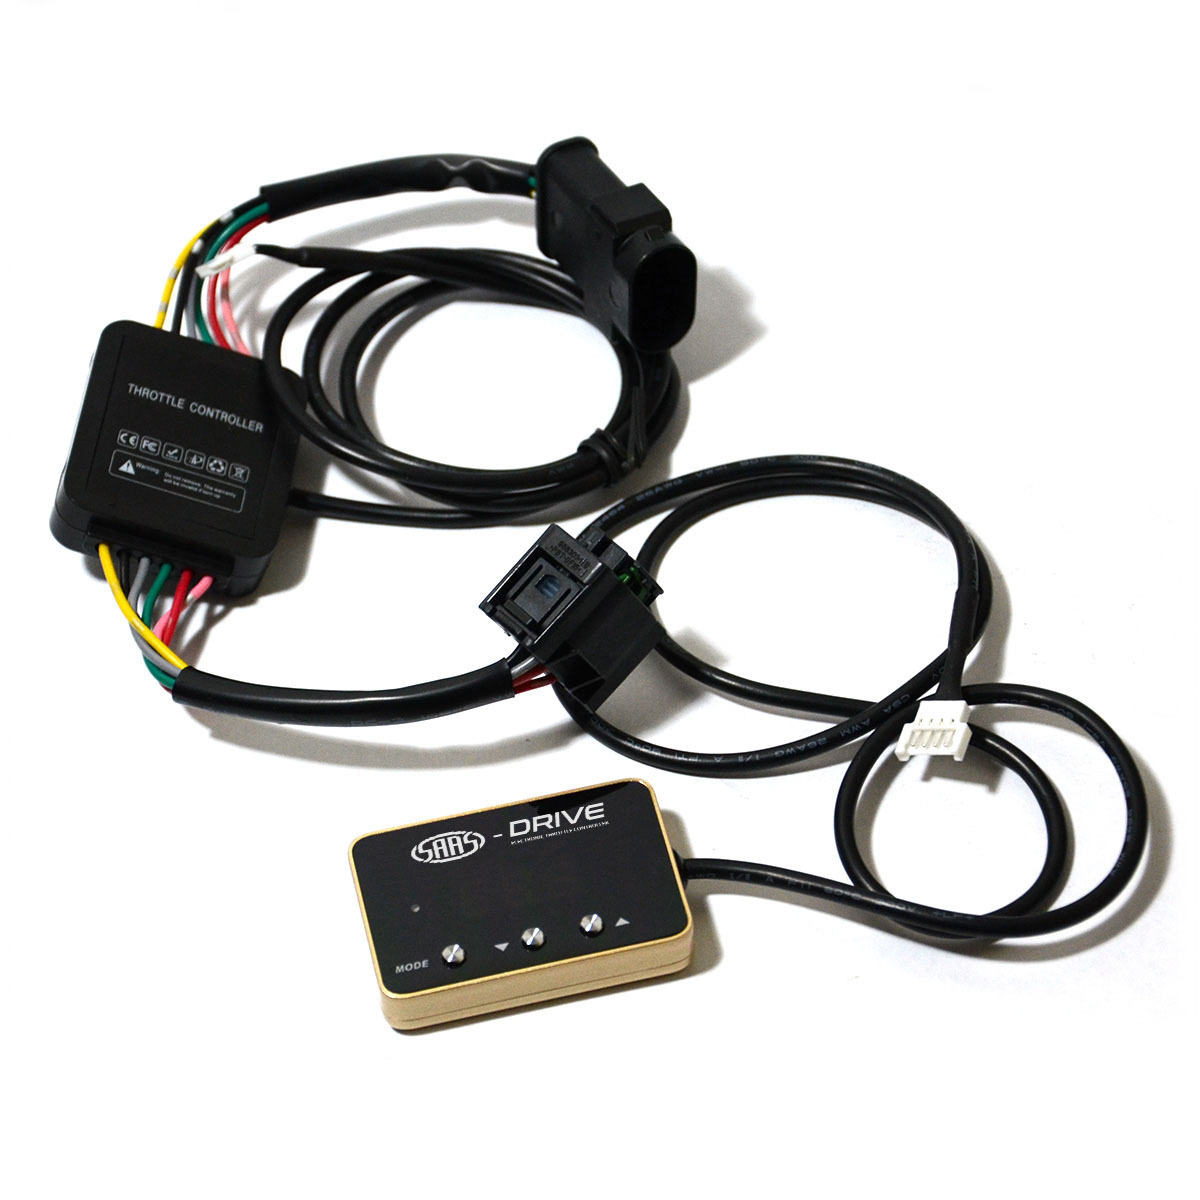 SAAS-Drive Throttle Controller suit LDV and more 